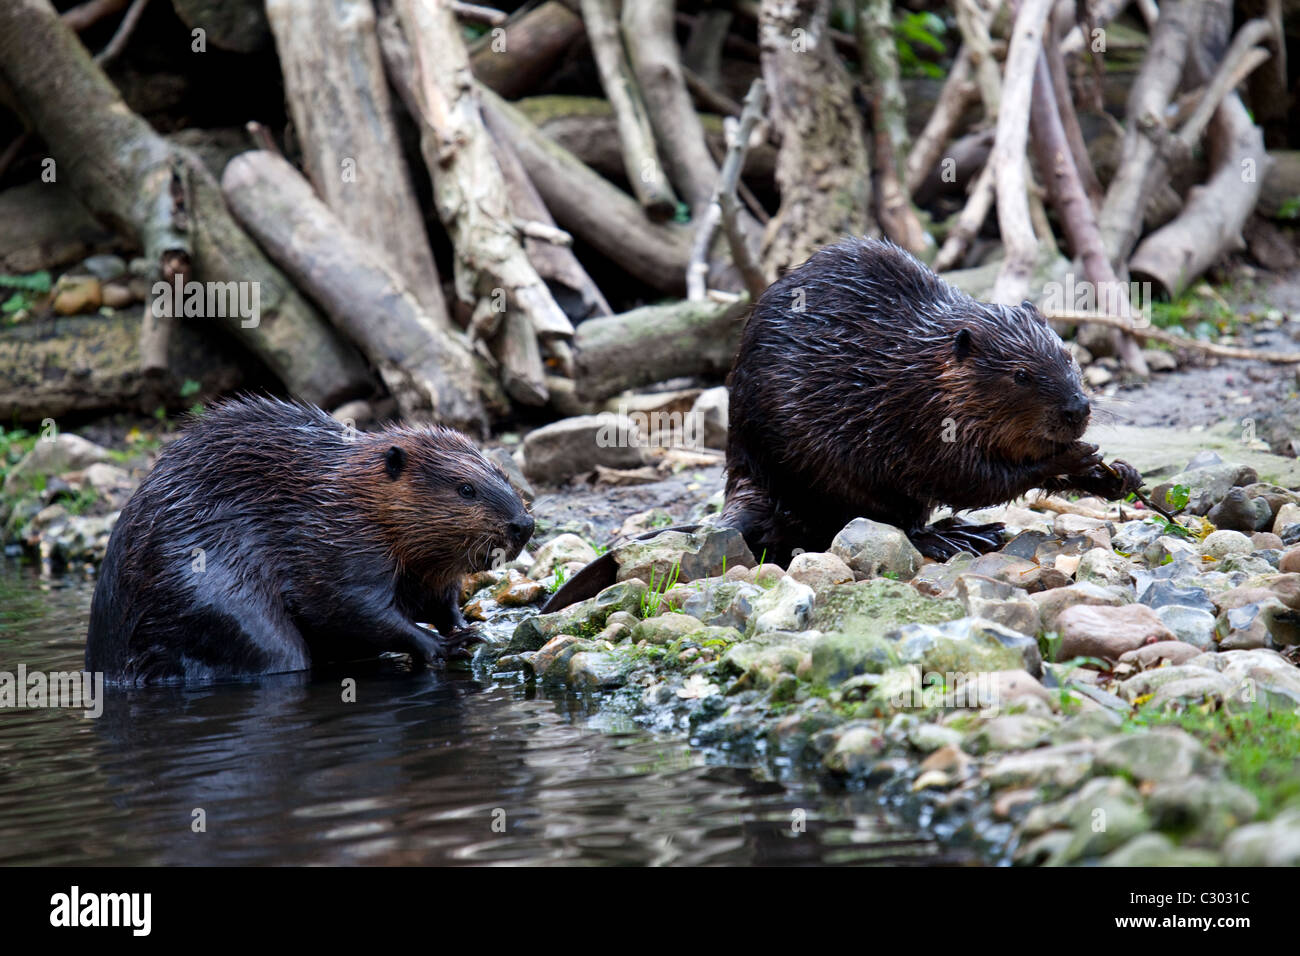 Two Beavers on the side of a river bank Stock Photo